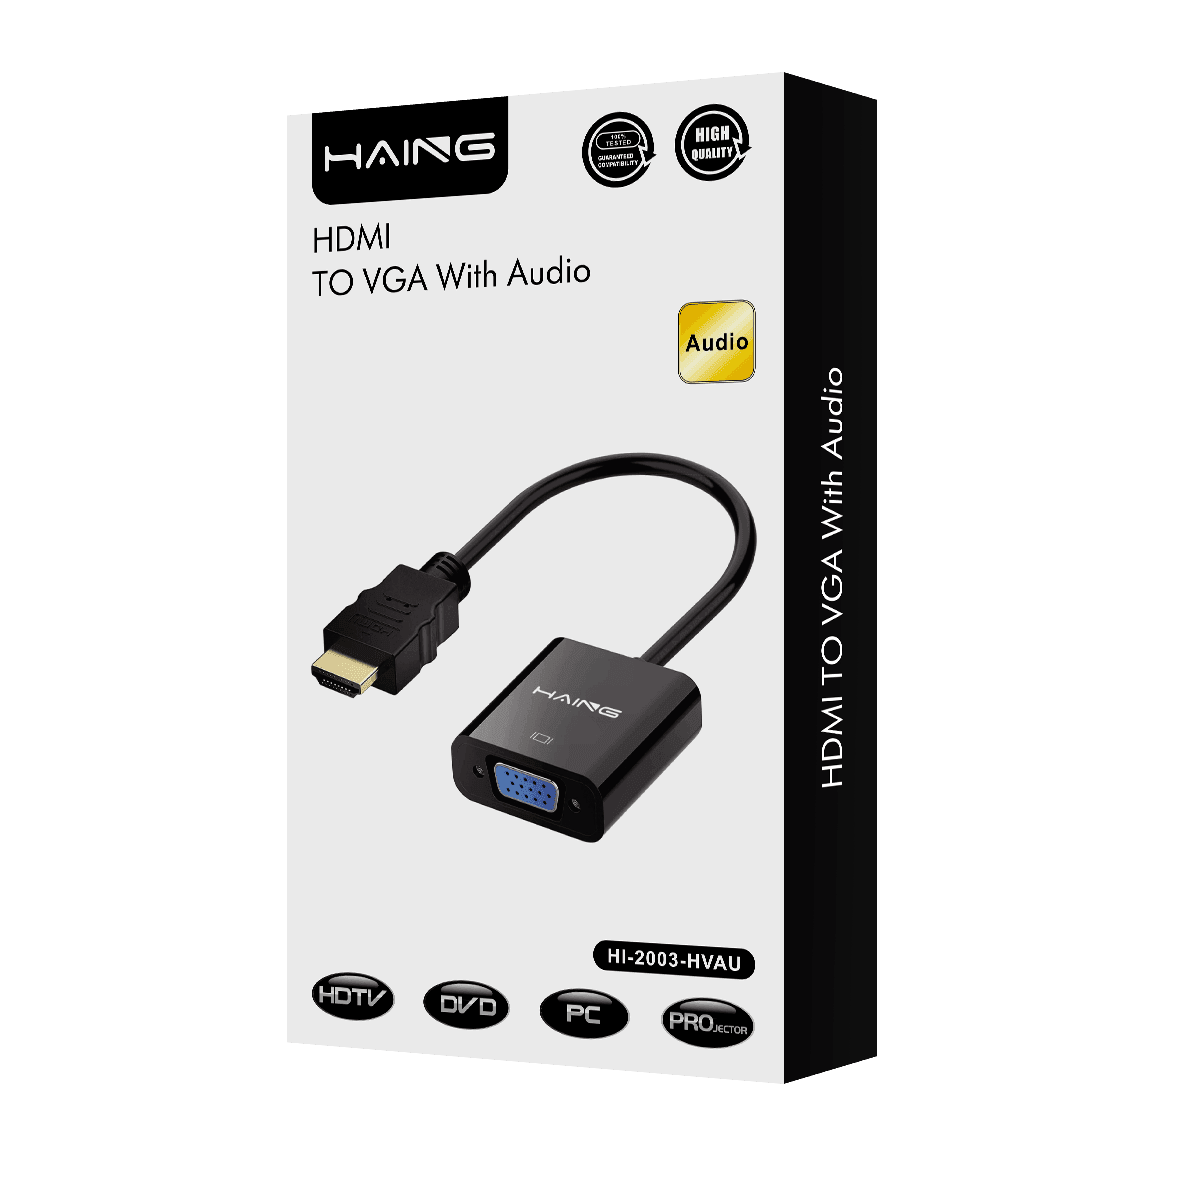 HAING HDMI TO VGA With Audio HIGH QUALITY JOD 6